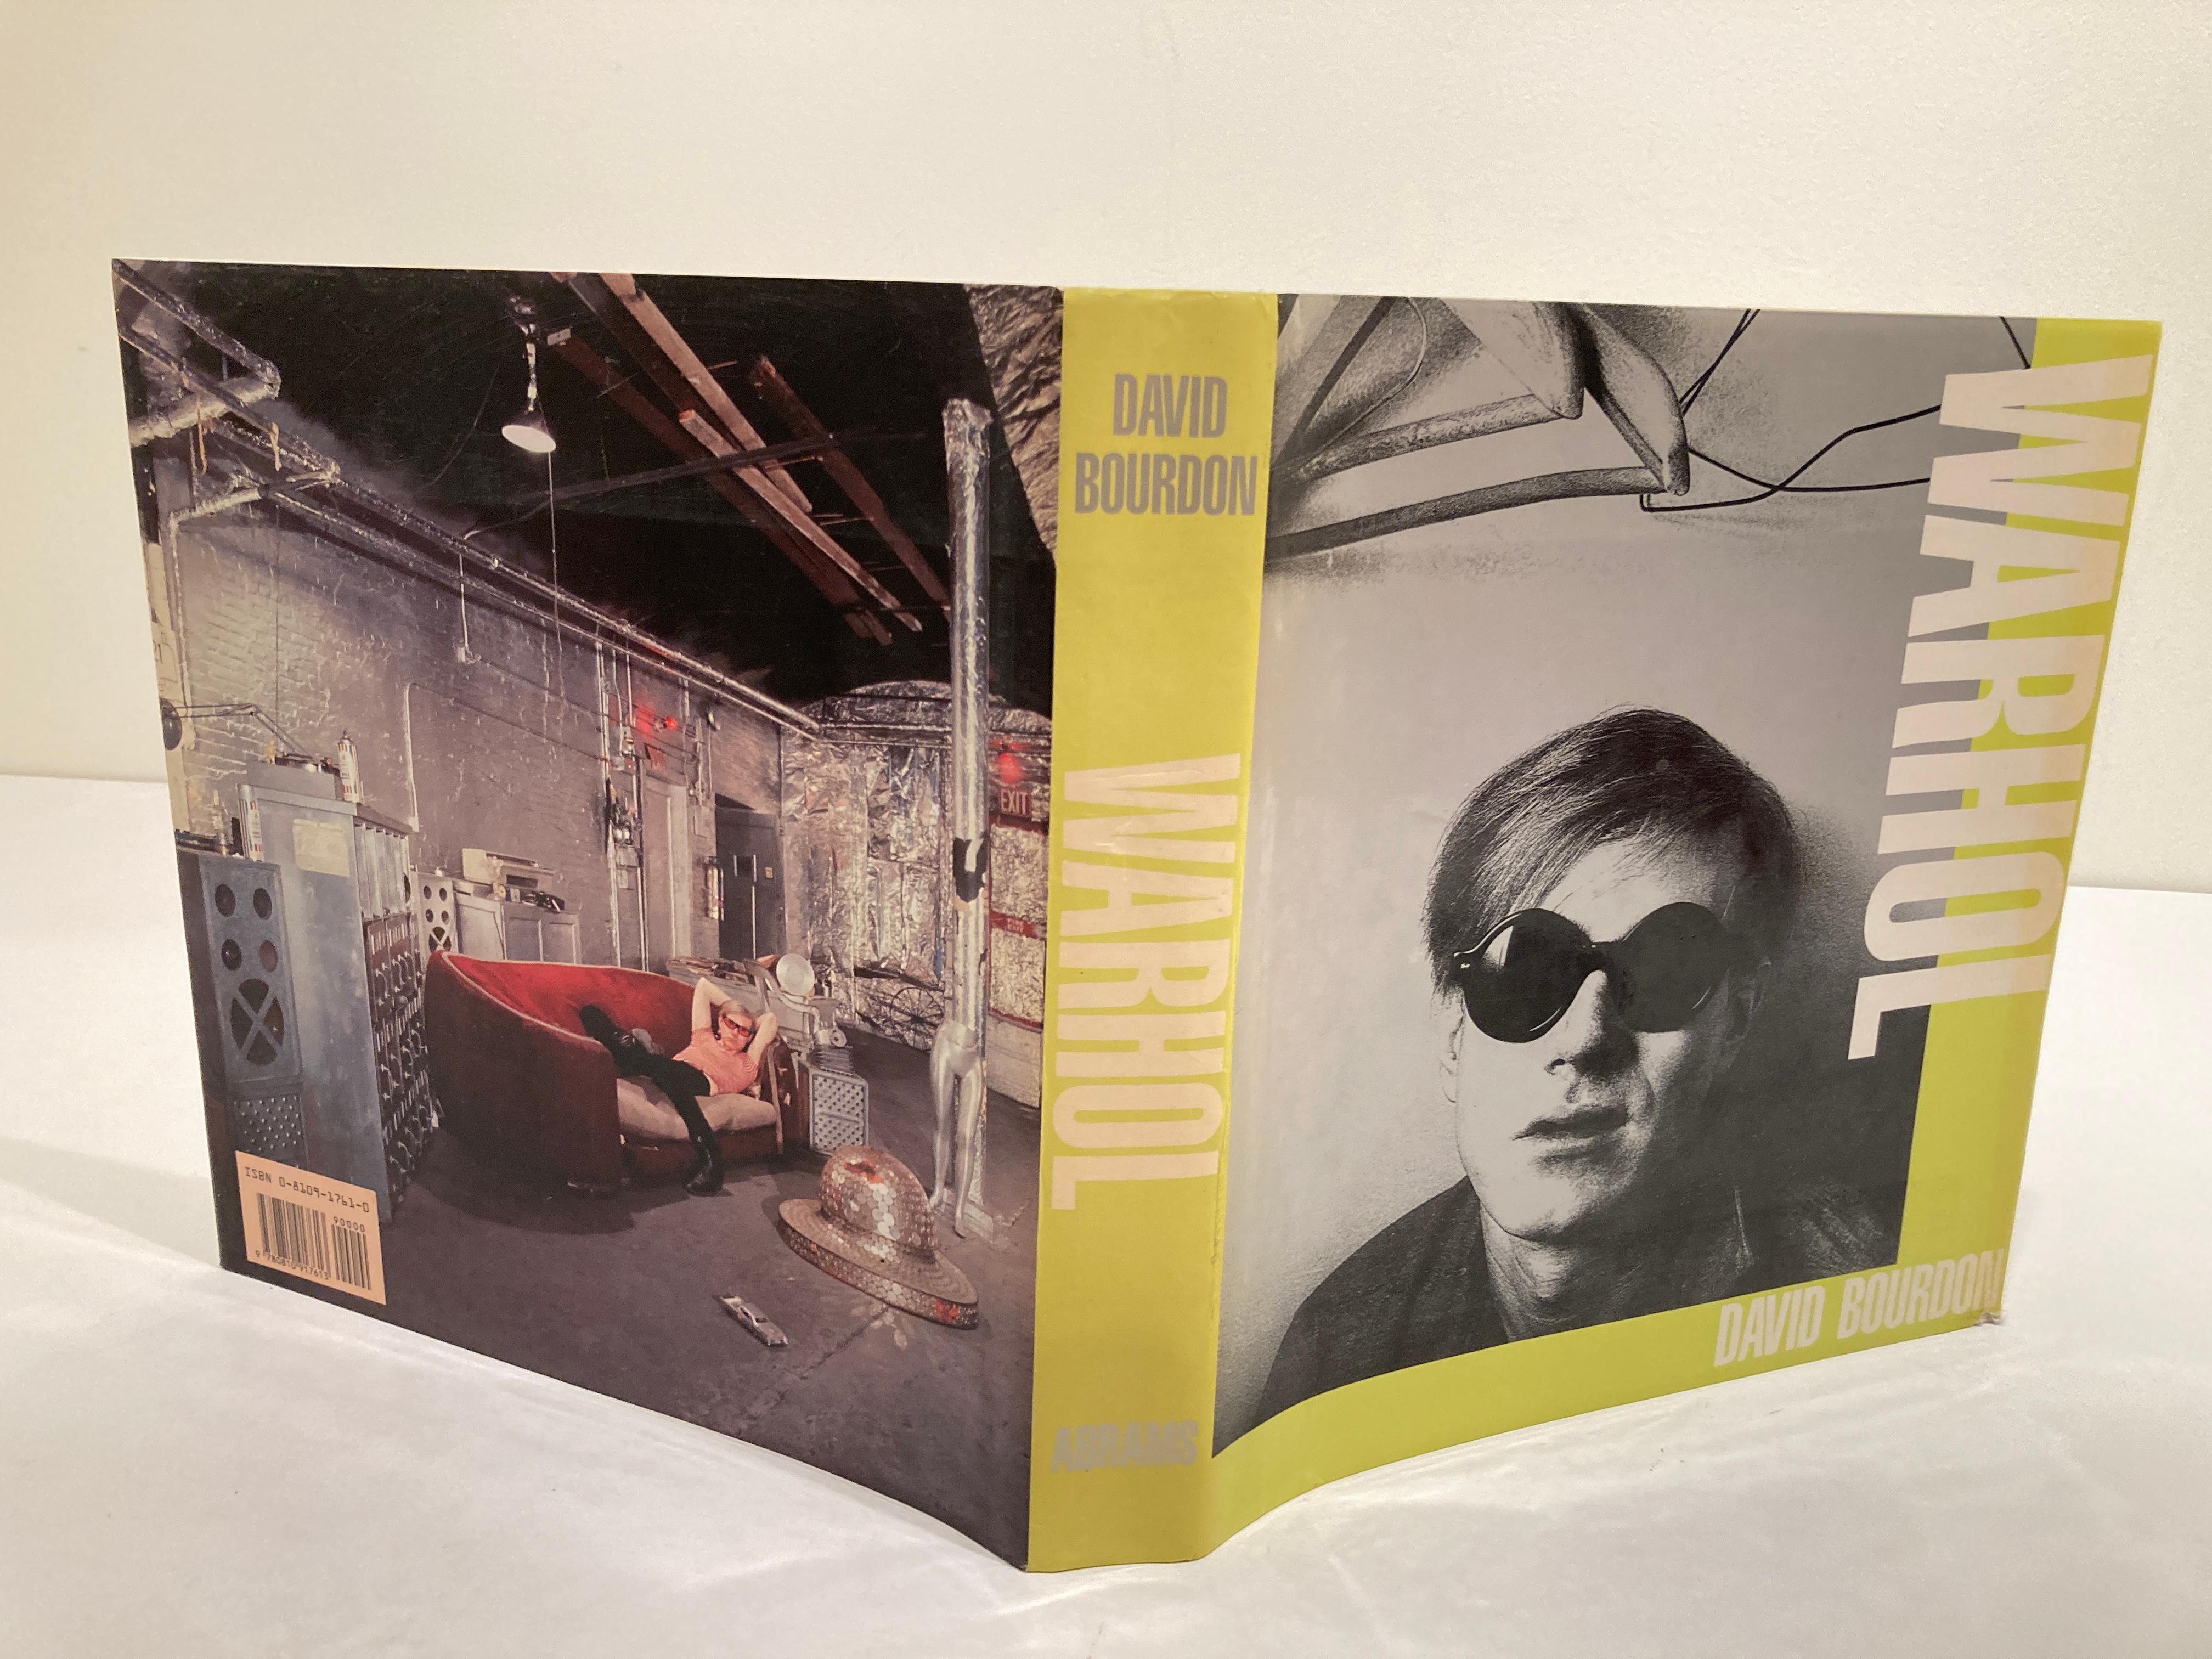 Andy Warhol by David Bourdon Collectible Poster Art Book Vintage, 1989 In Good Condition For Sale In North Hollywood, CA